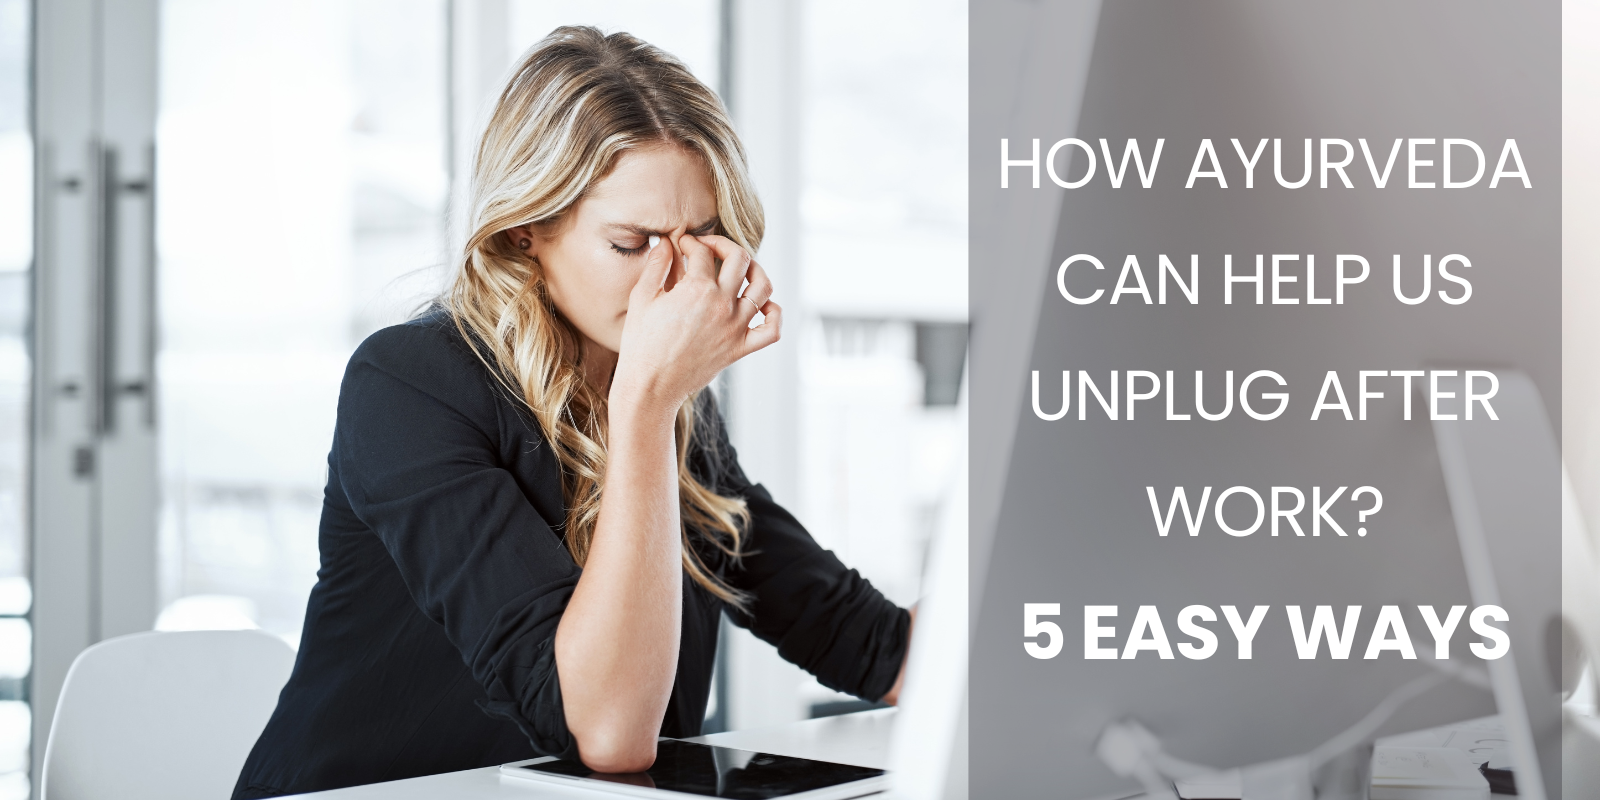 How Ayurveda Can Help Us Unplug After Work